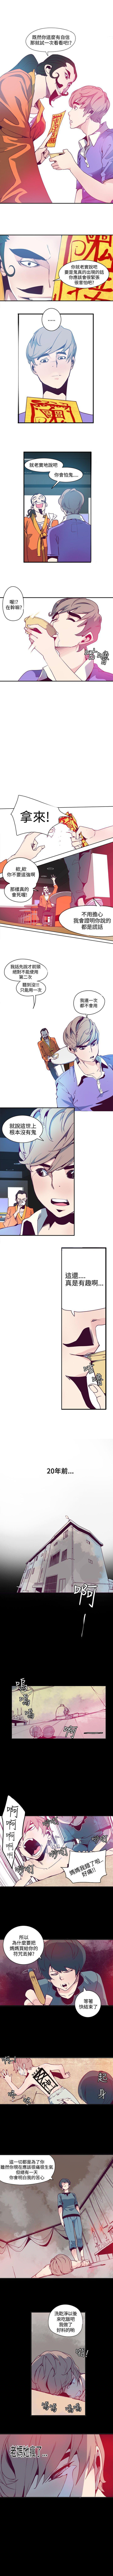 Glasses 神級公務員 1-23 Fingers - Page 4